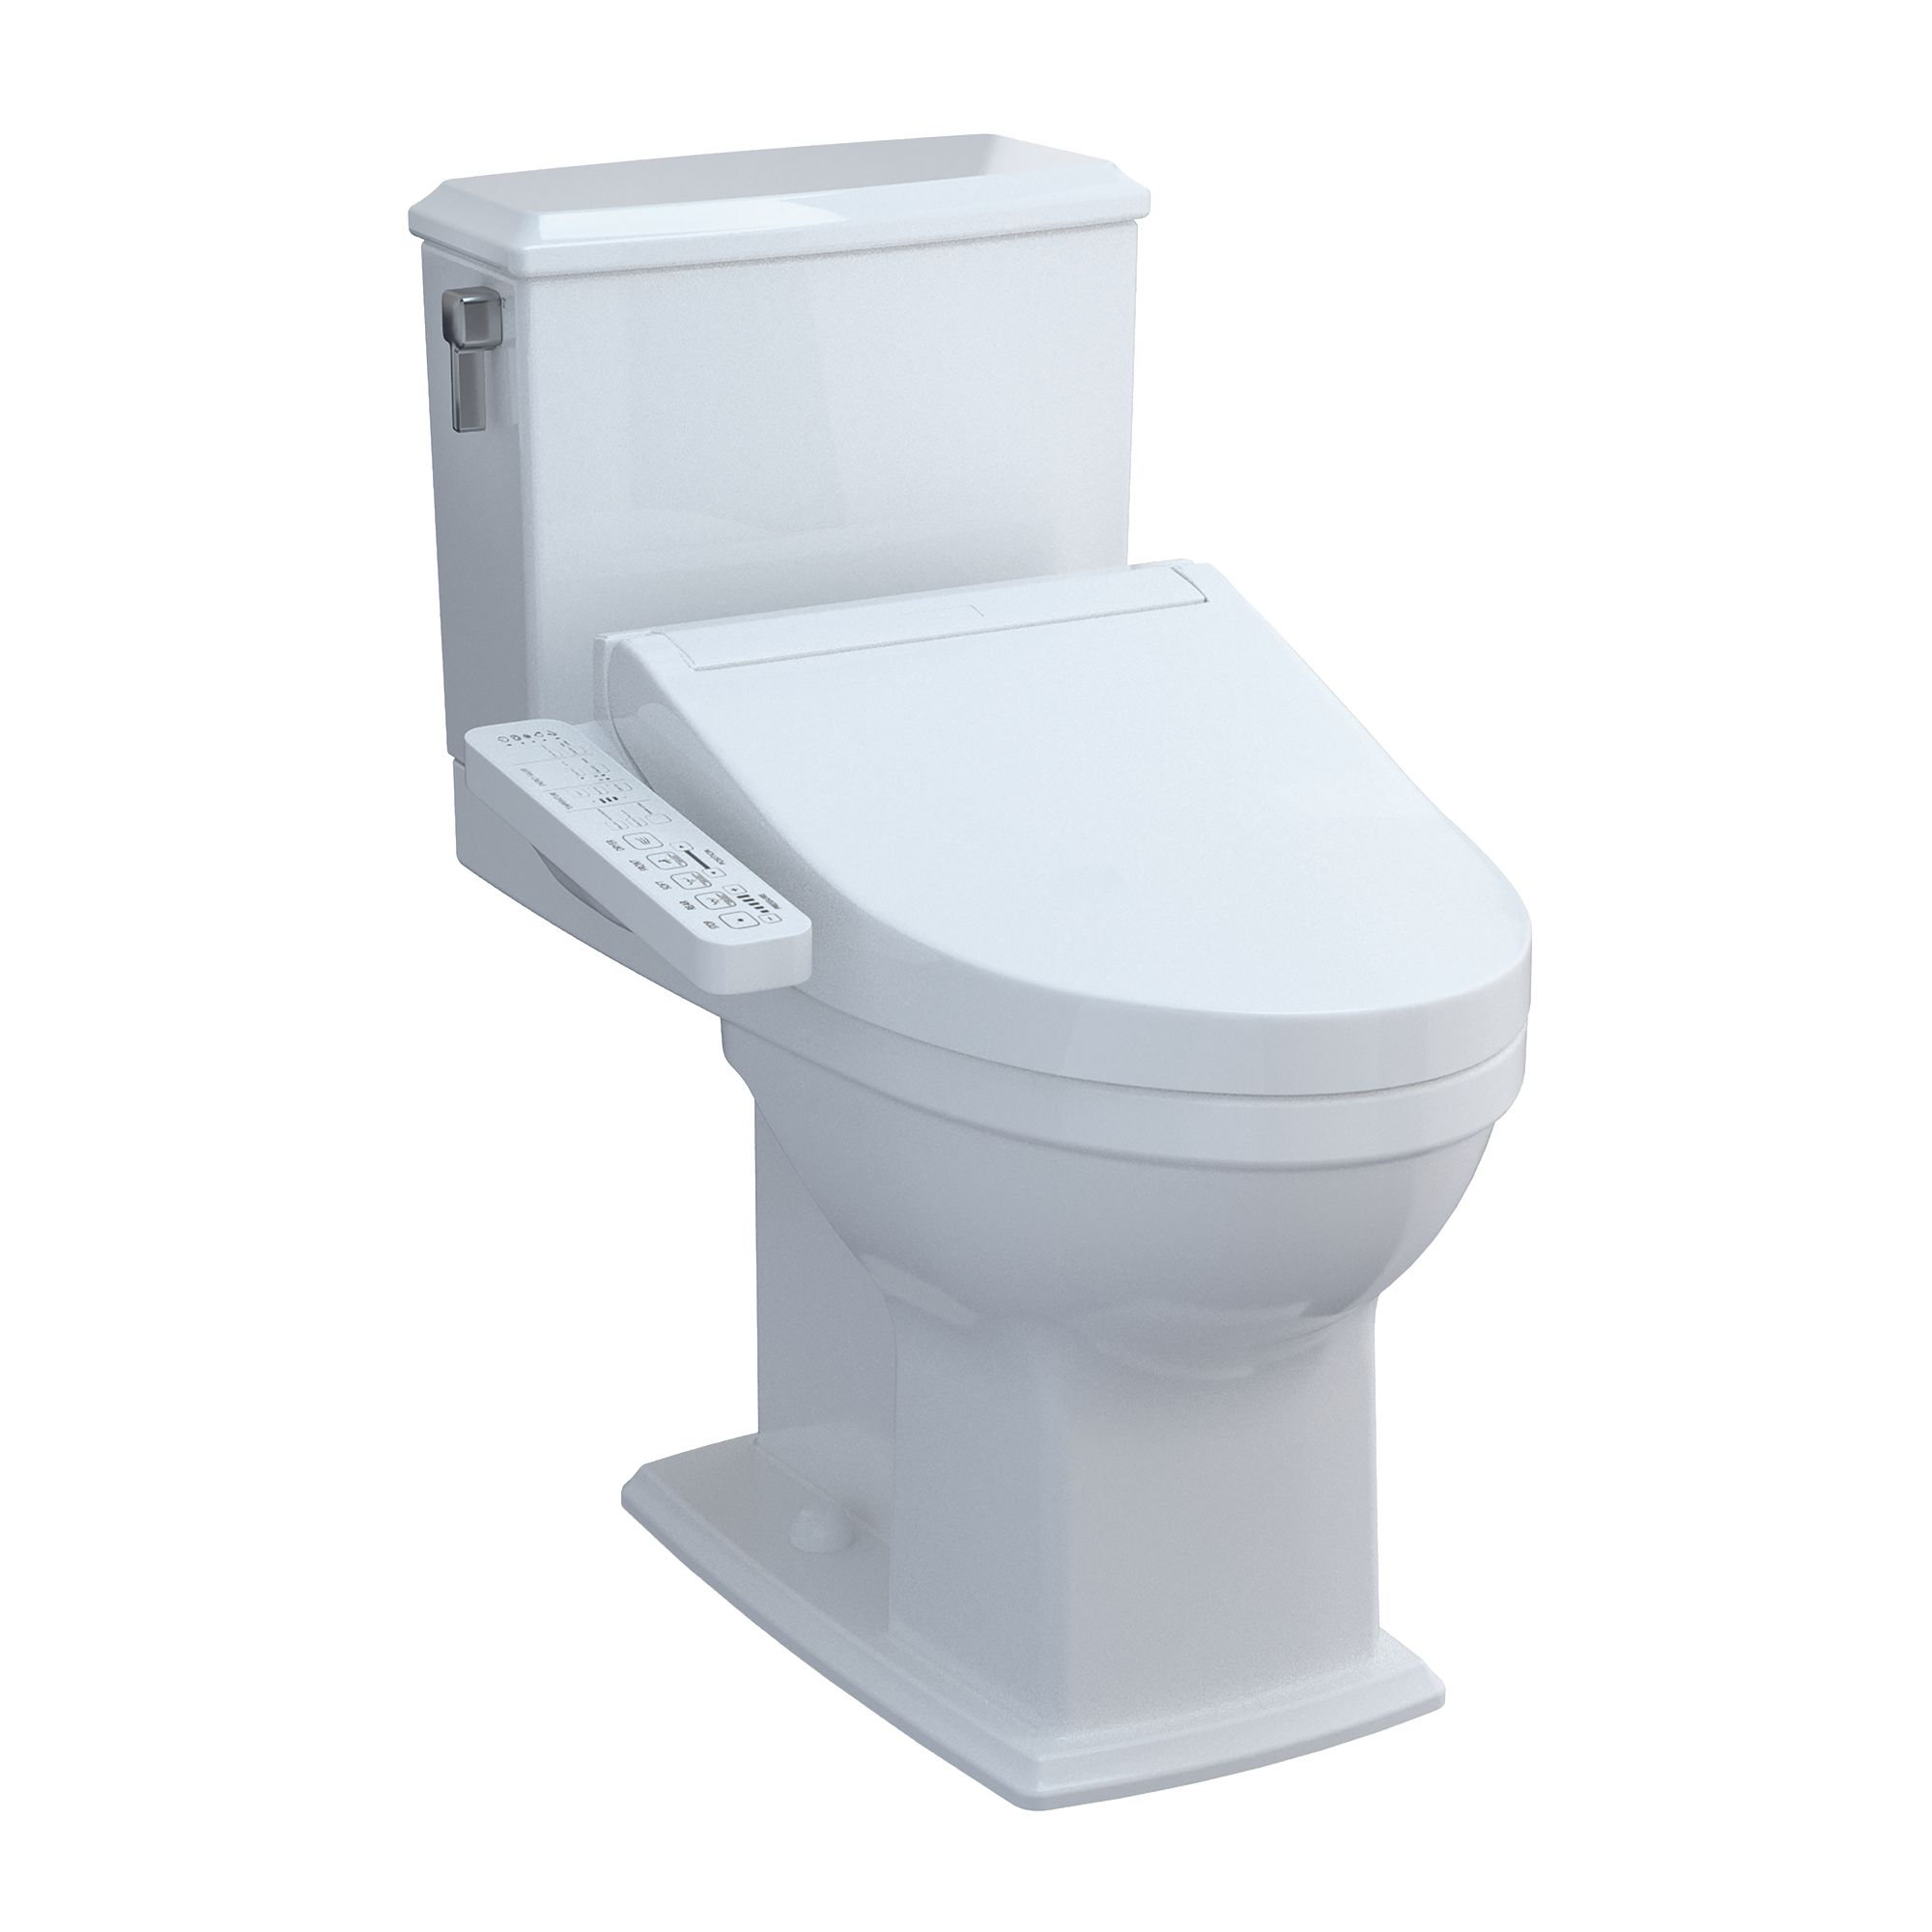 Connelly - WASHLET®+ C2 Two-Piece Toilet - 1.28 GPF & 0.9 GPF